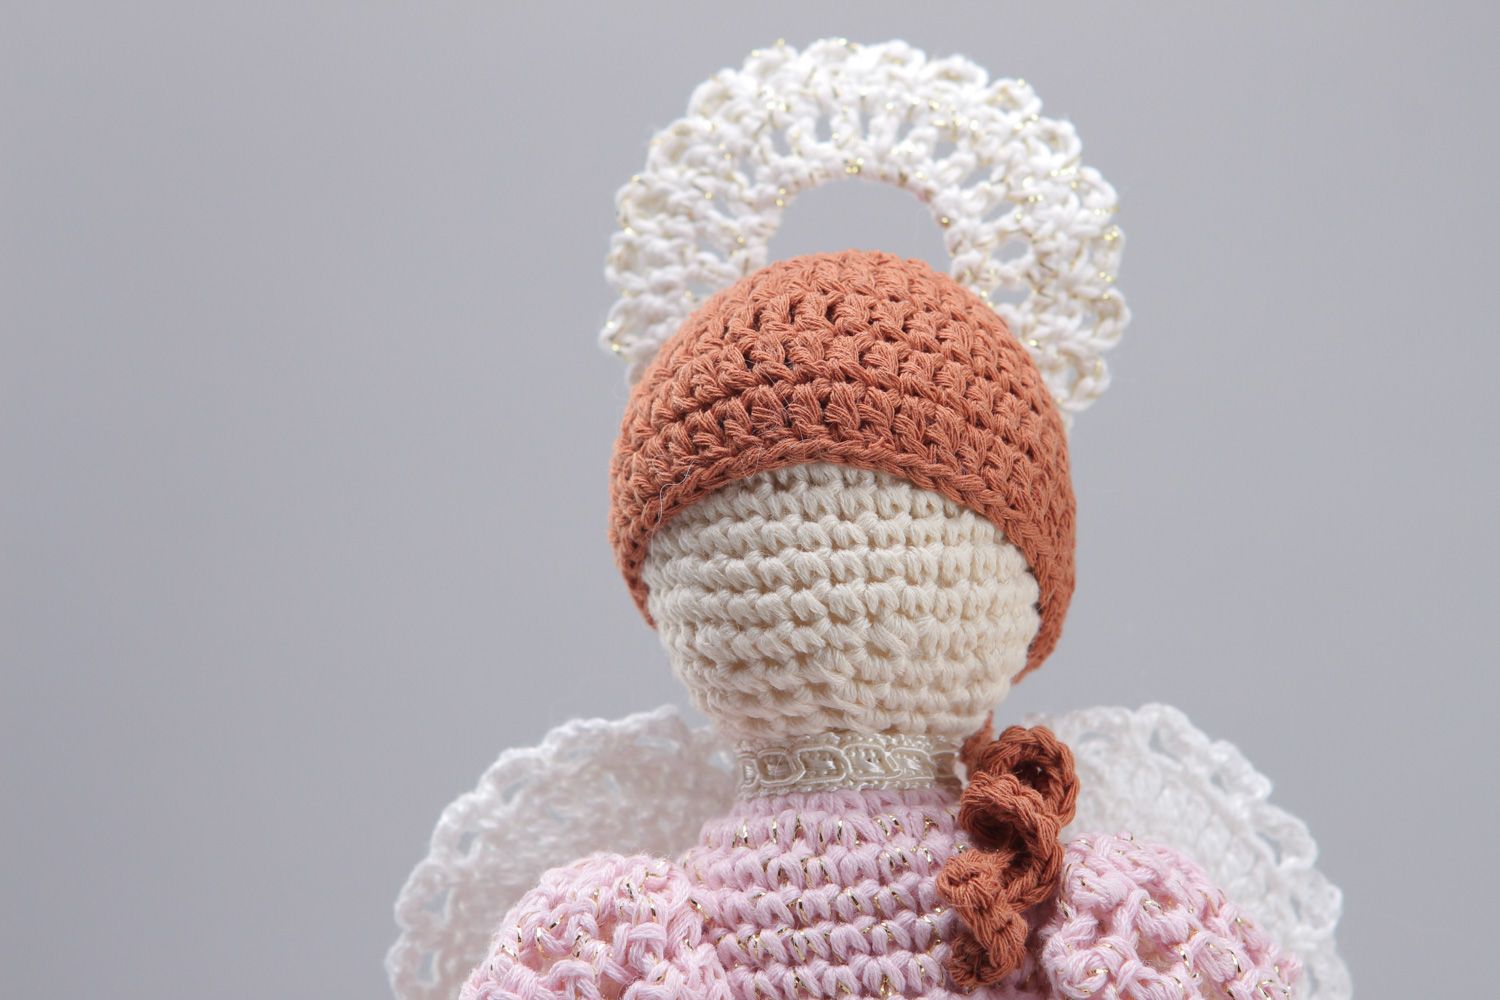 Handmade soft toy angel crocheted of cotton threads for kids and interior decor photo 2